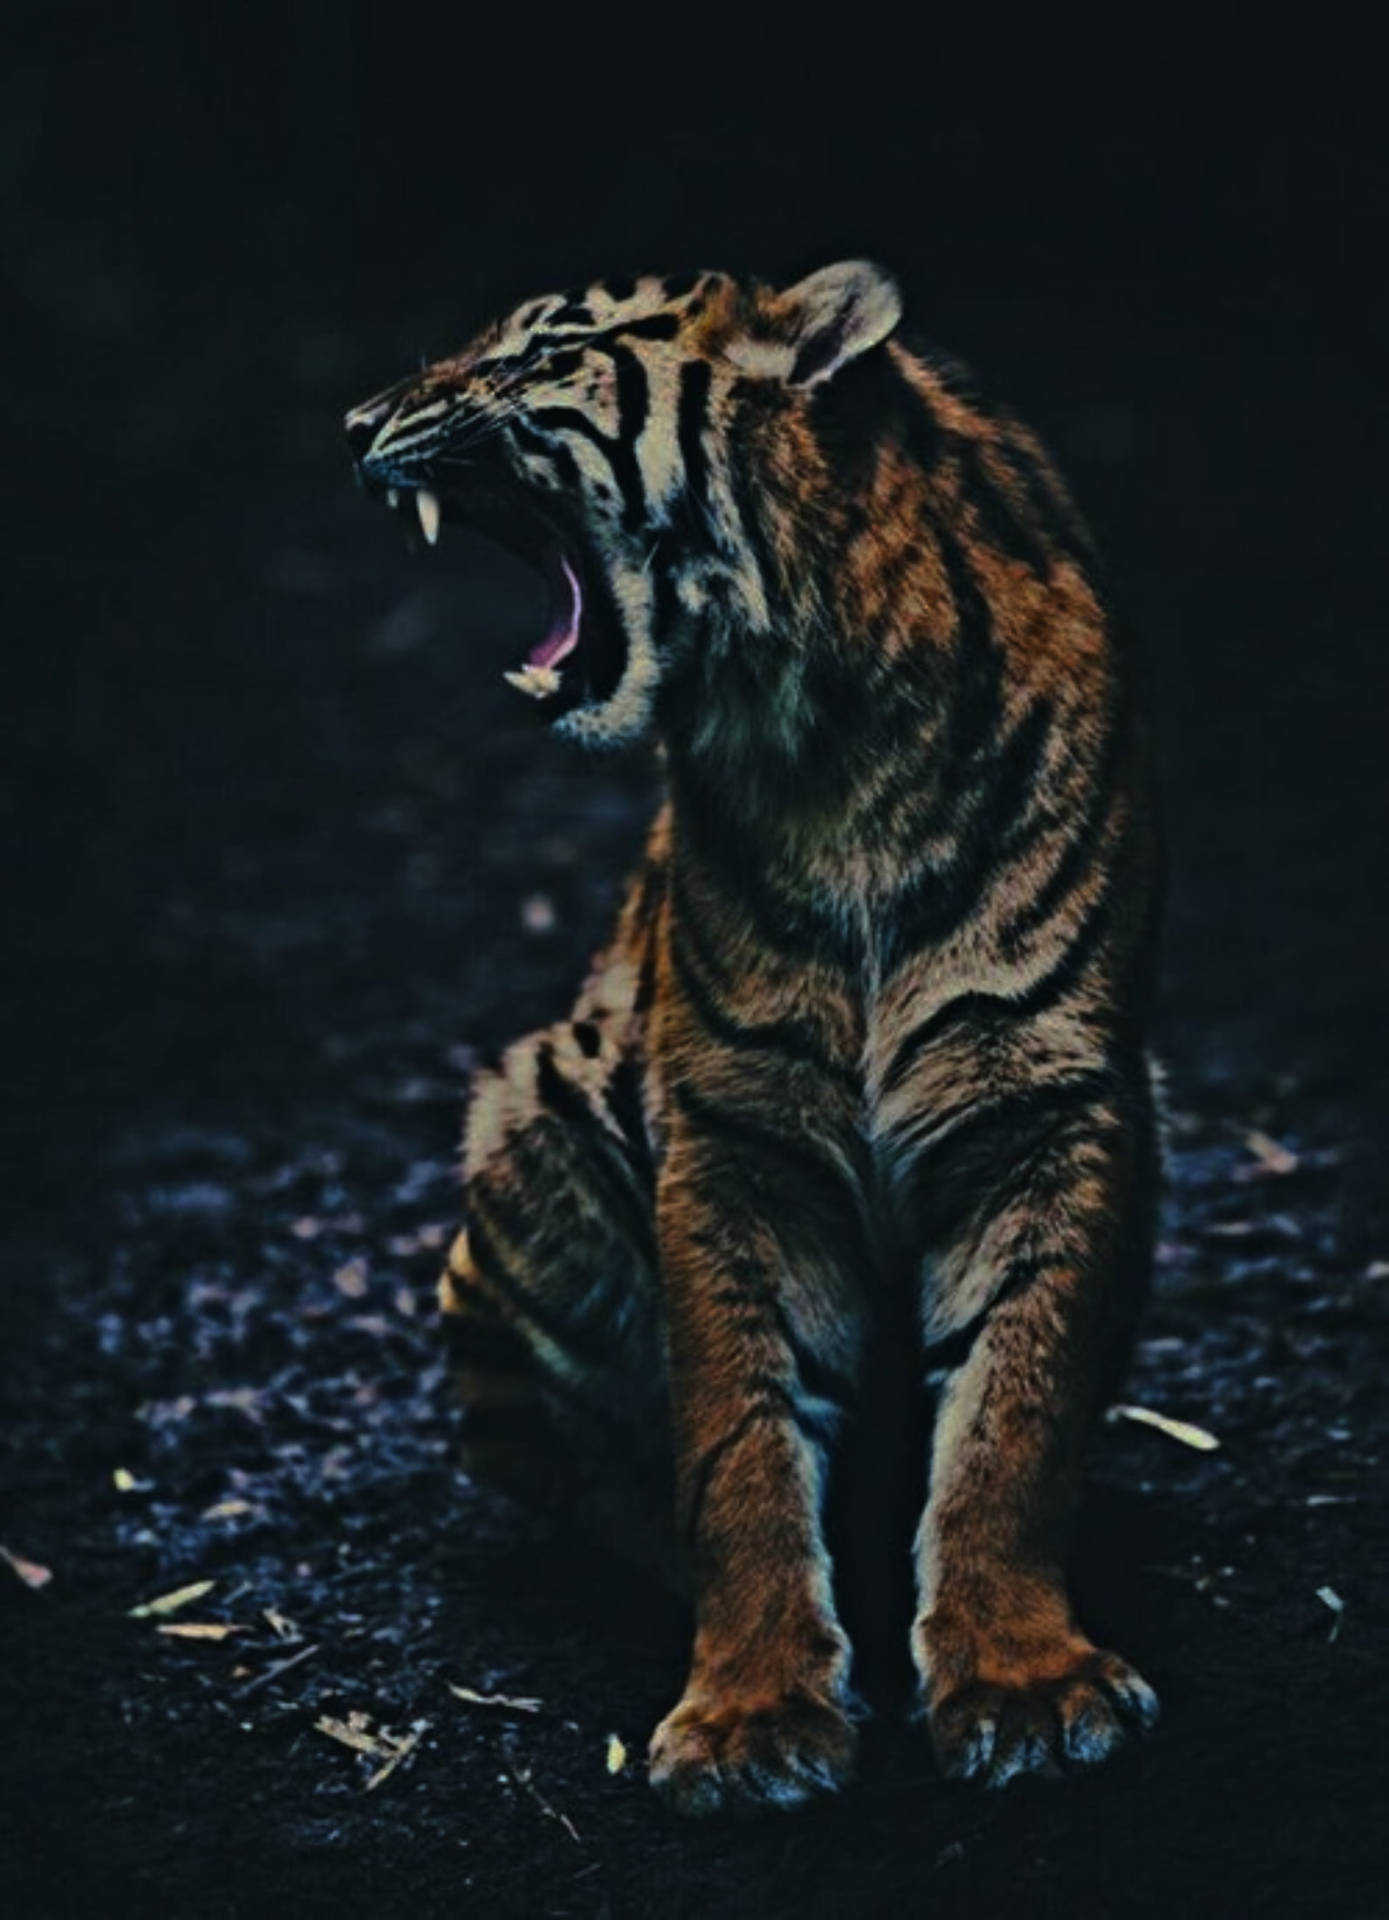 Growling Tiger With Black Tiger Stripes Wallpaper